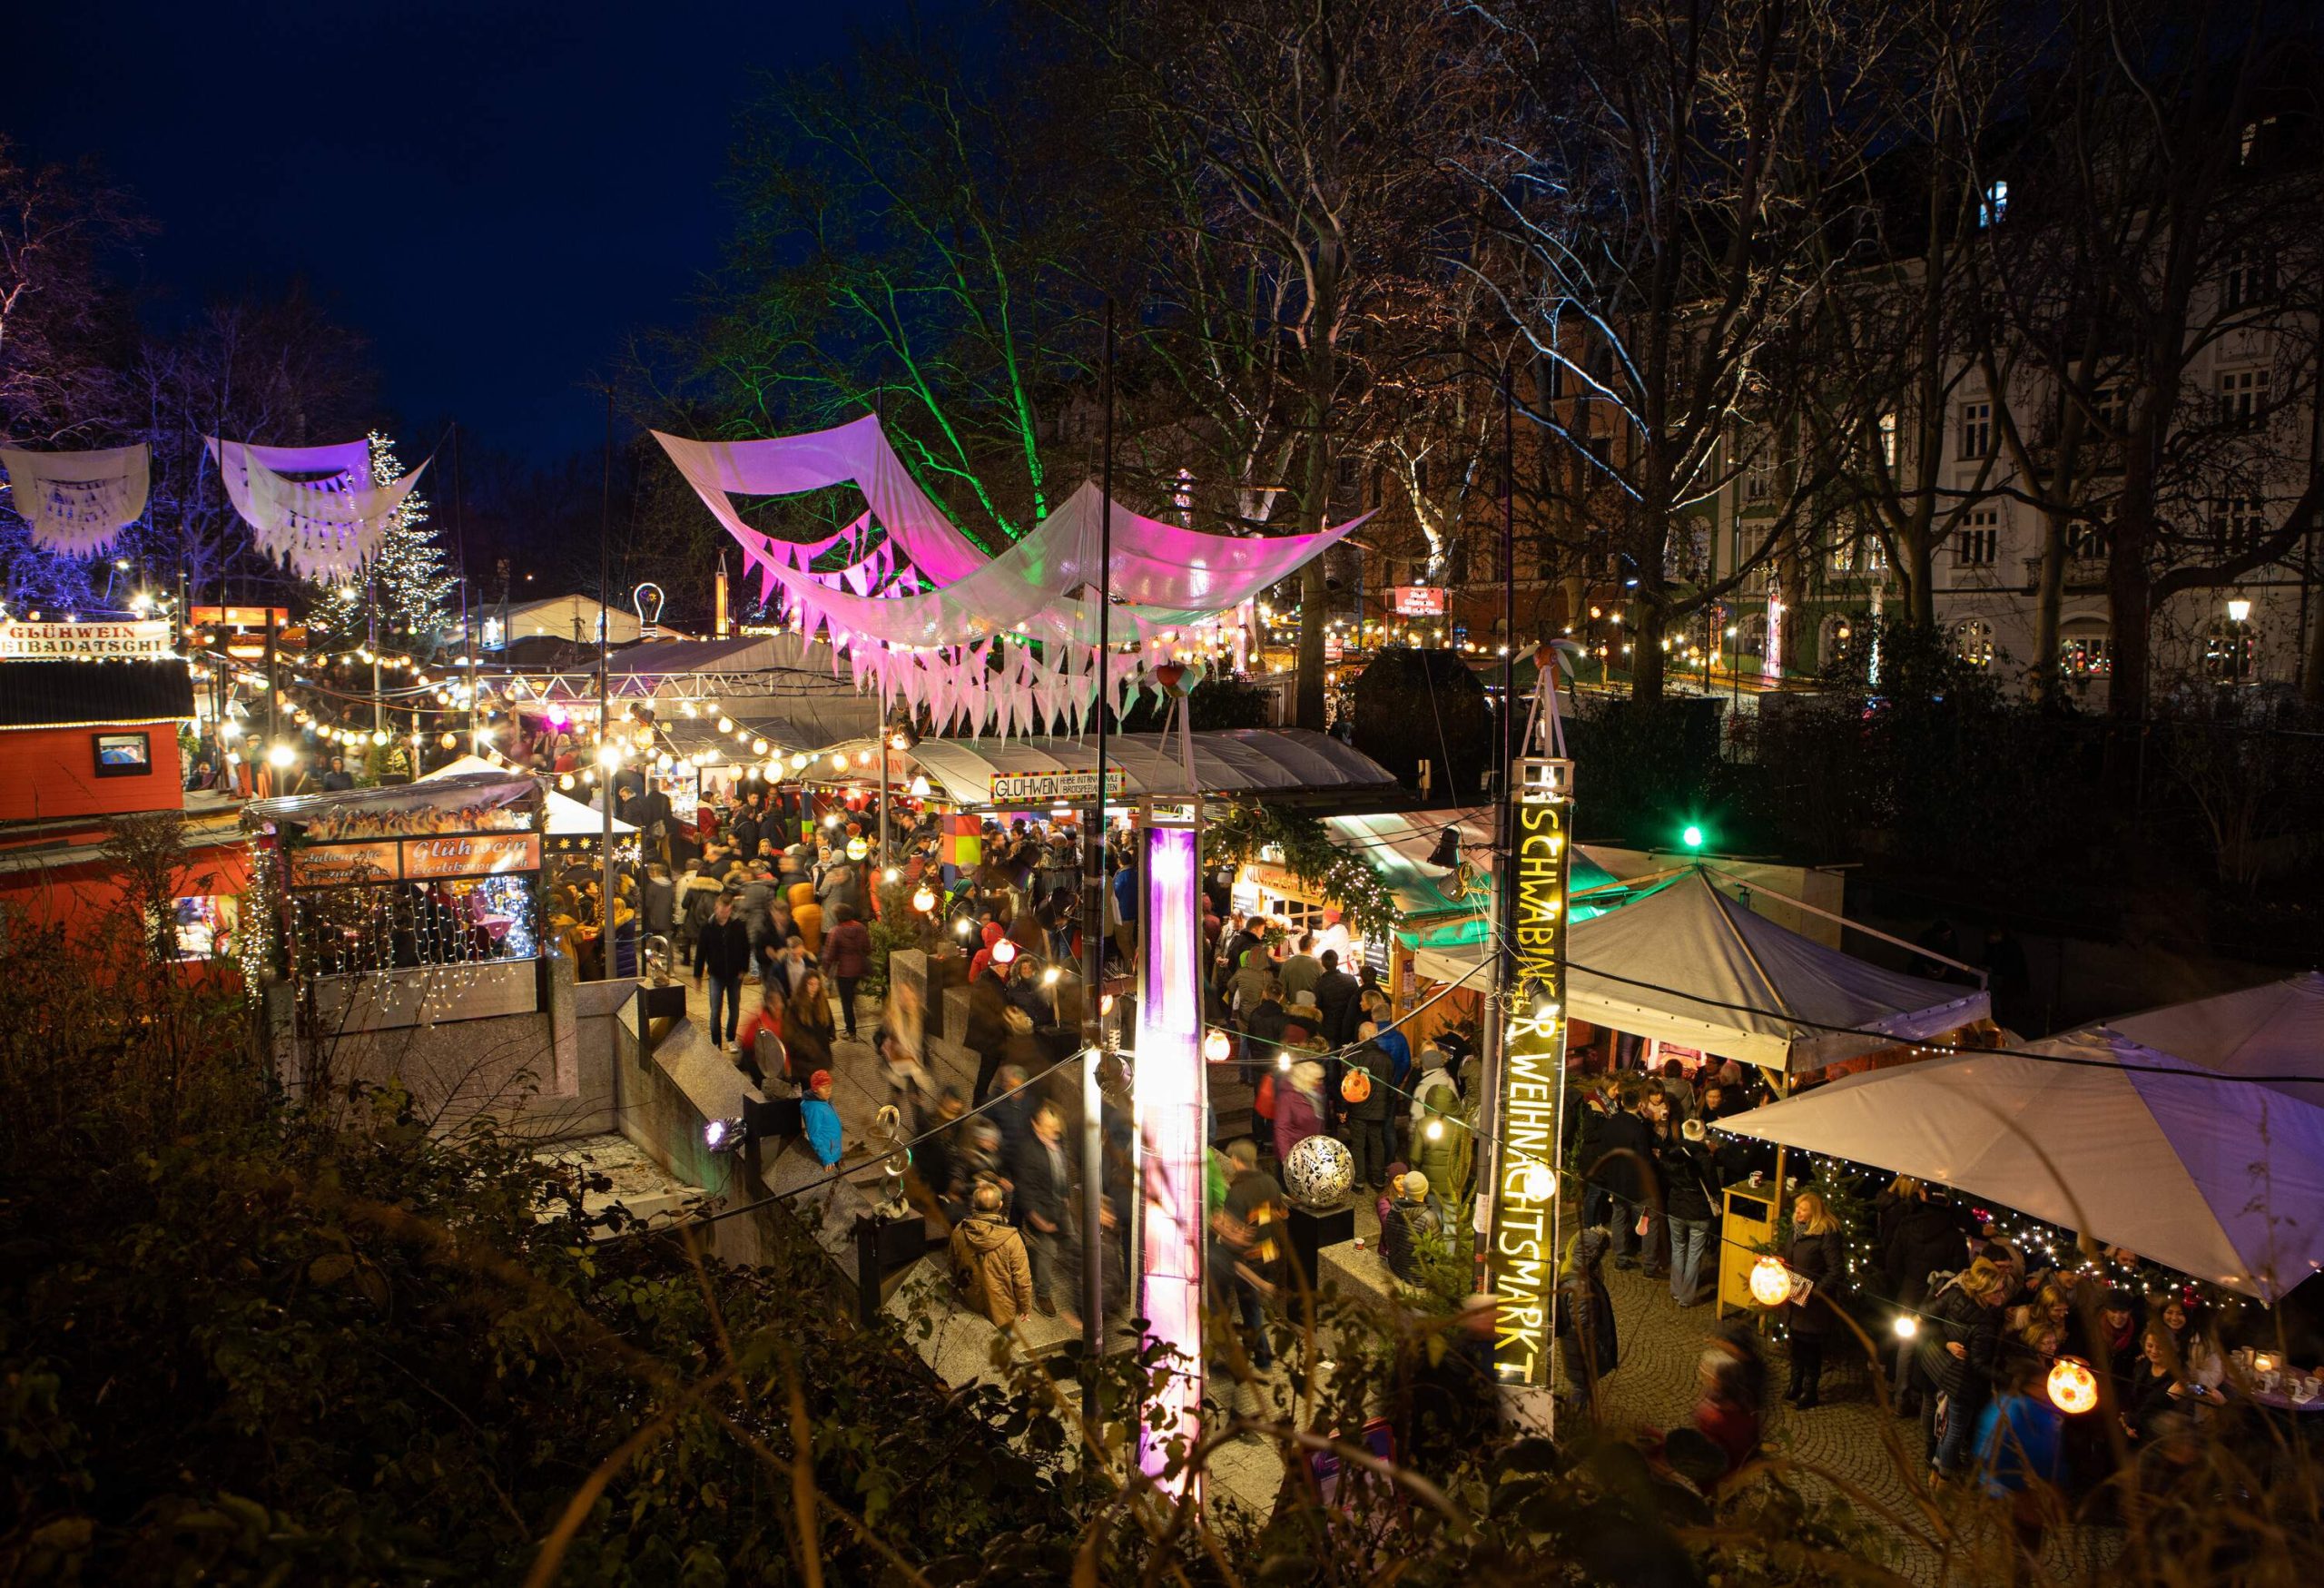 People are in motion in the brightly illuminated Christmas market lined with tall bare trees.